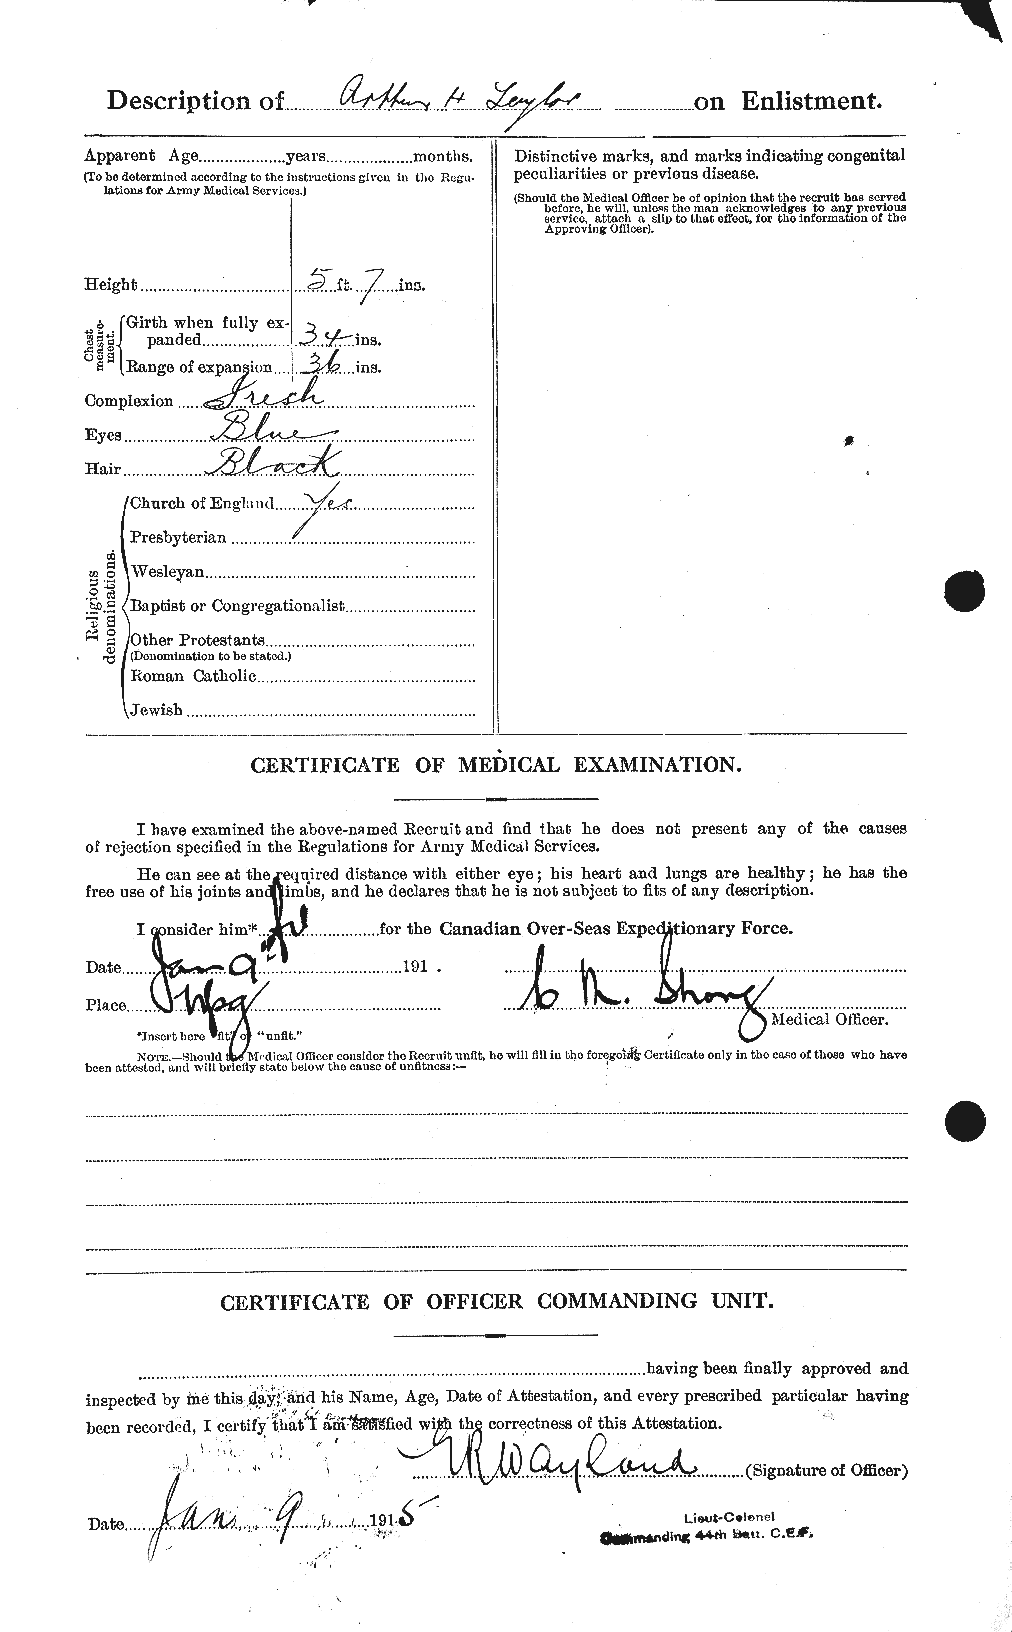 Personnel Records of the First World War - CEF 626726b